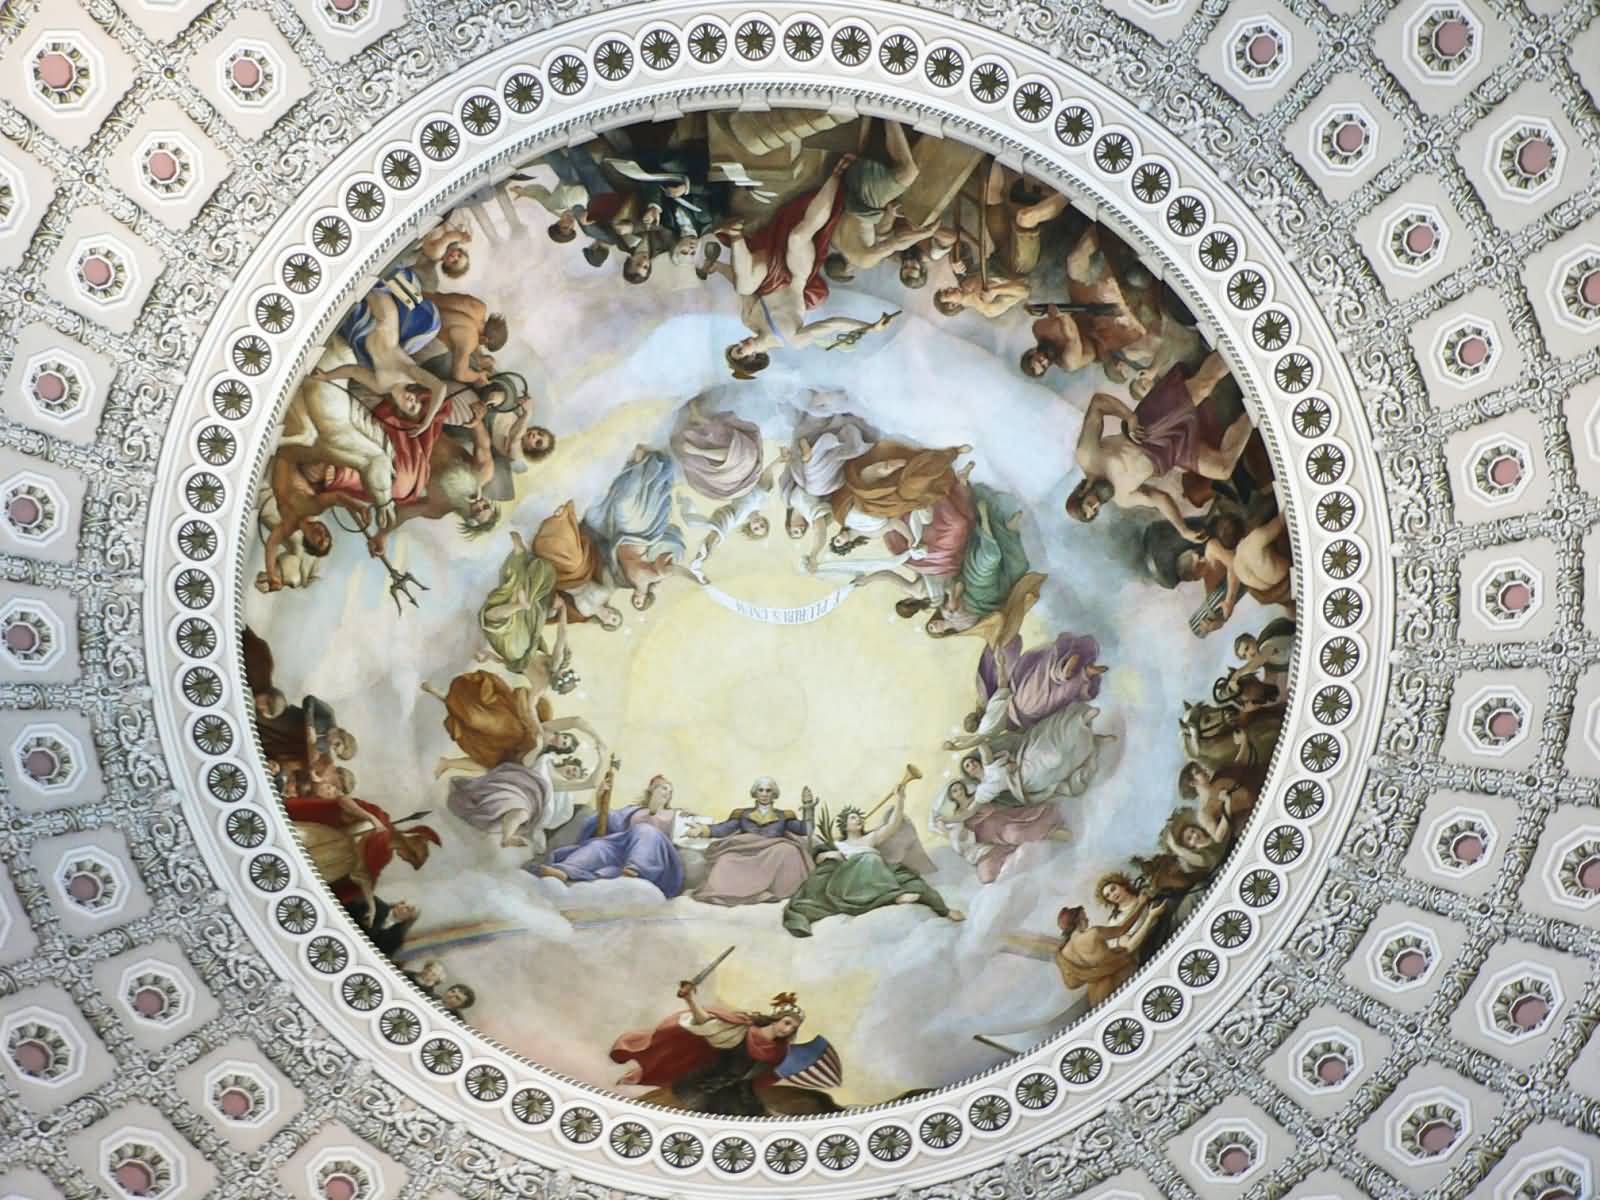 Apotheosis of George Washington Painting Inside The Dome Of United States Capitol